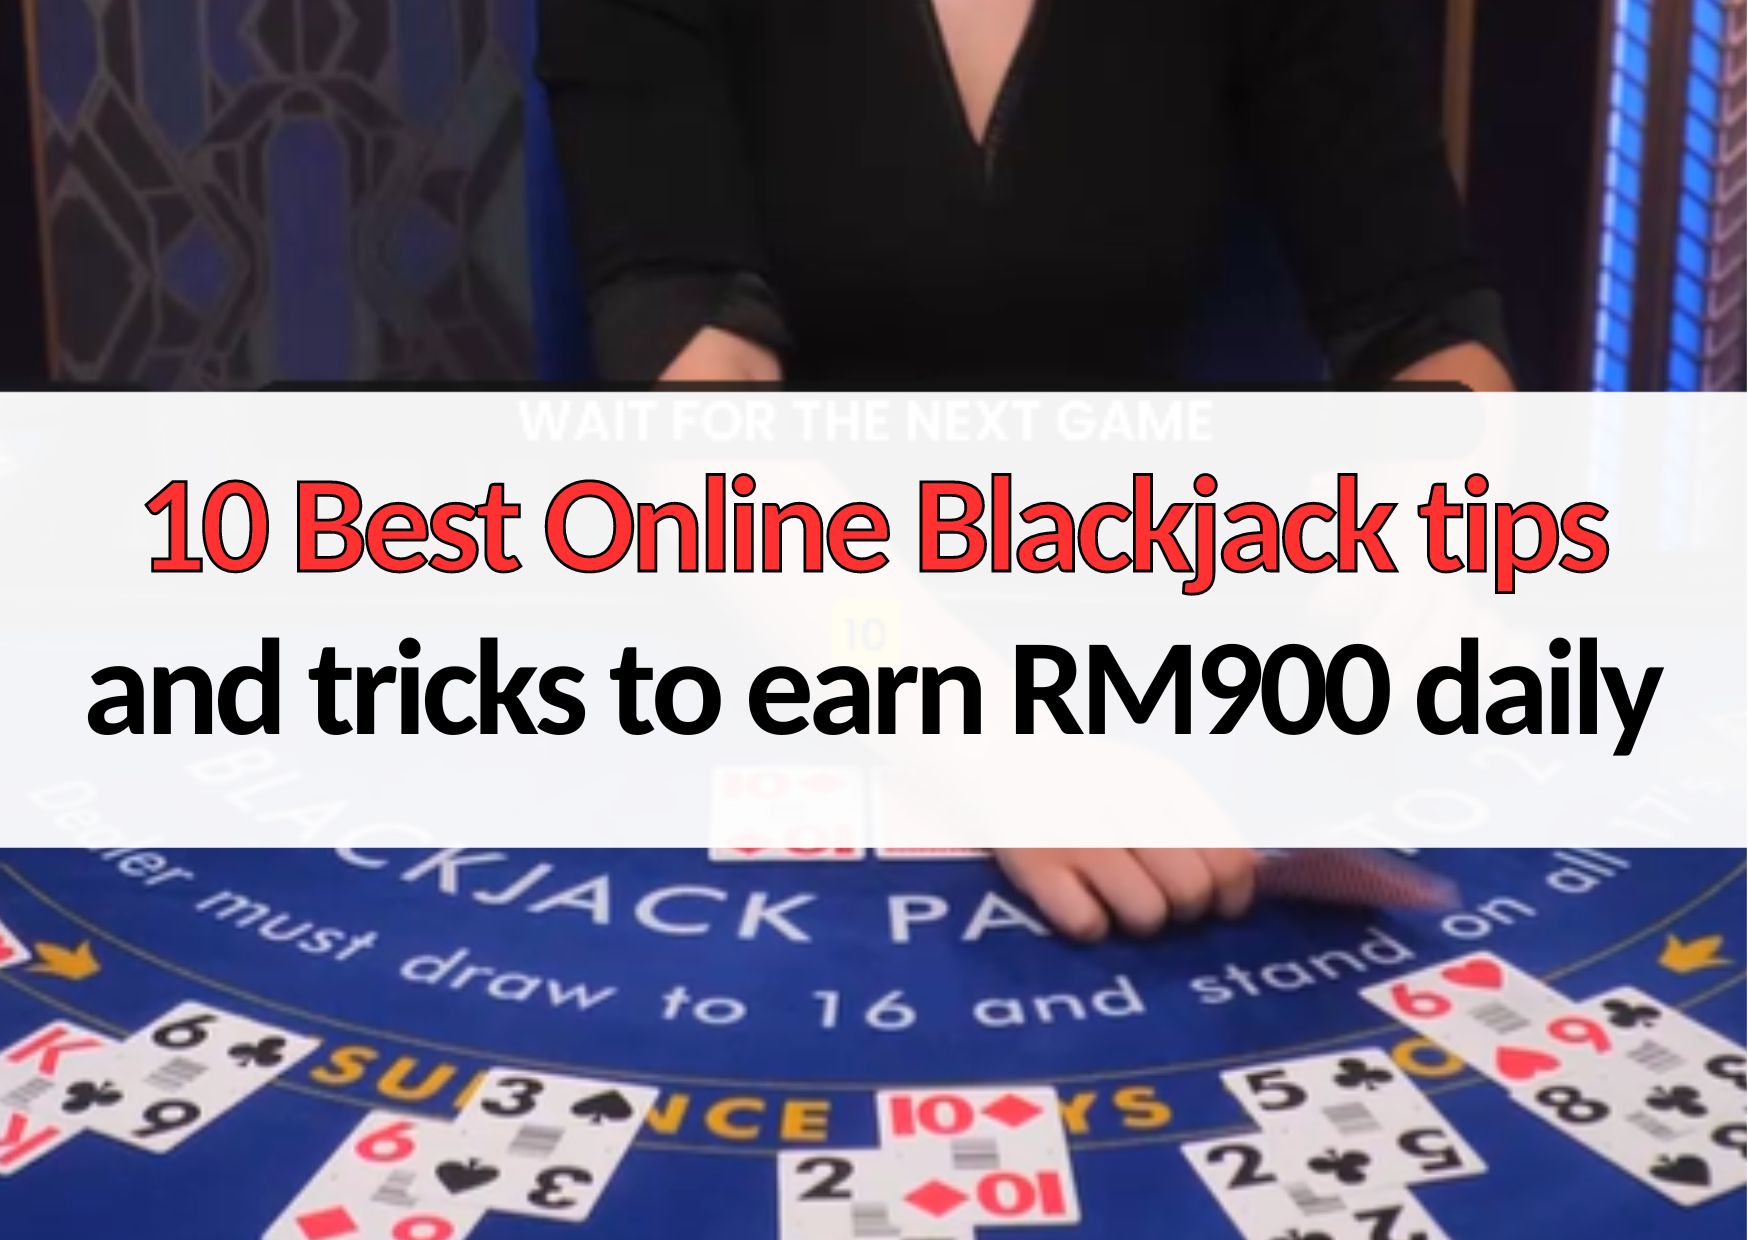 10 Best Online Blackjack tips and tricks to earn RM900 daily